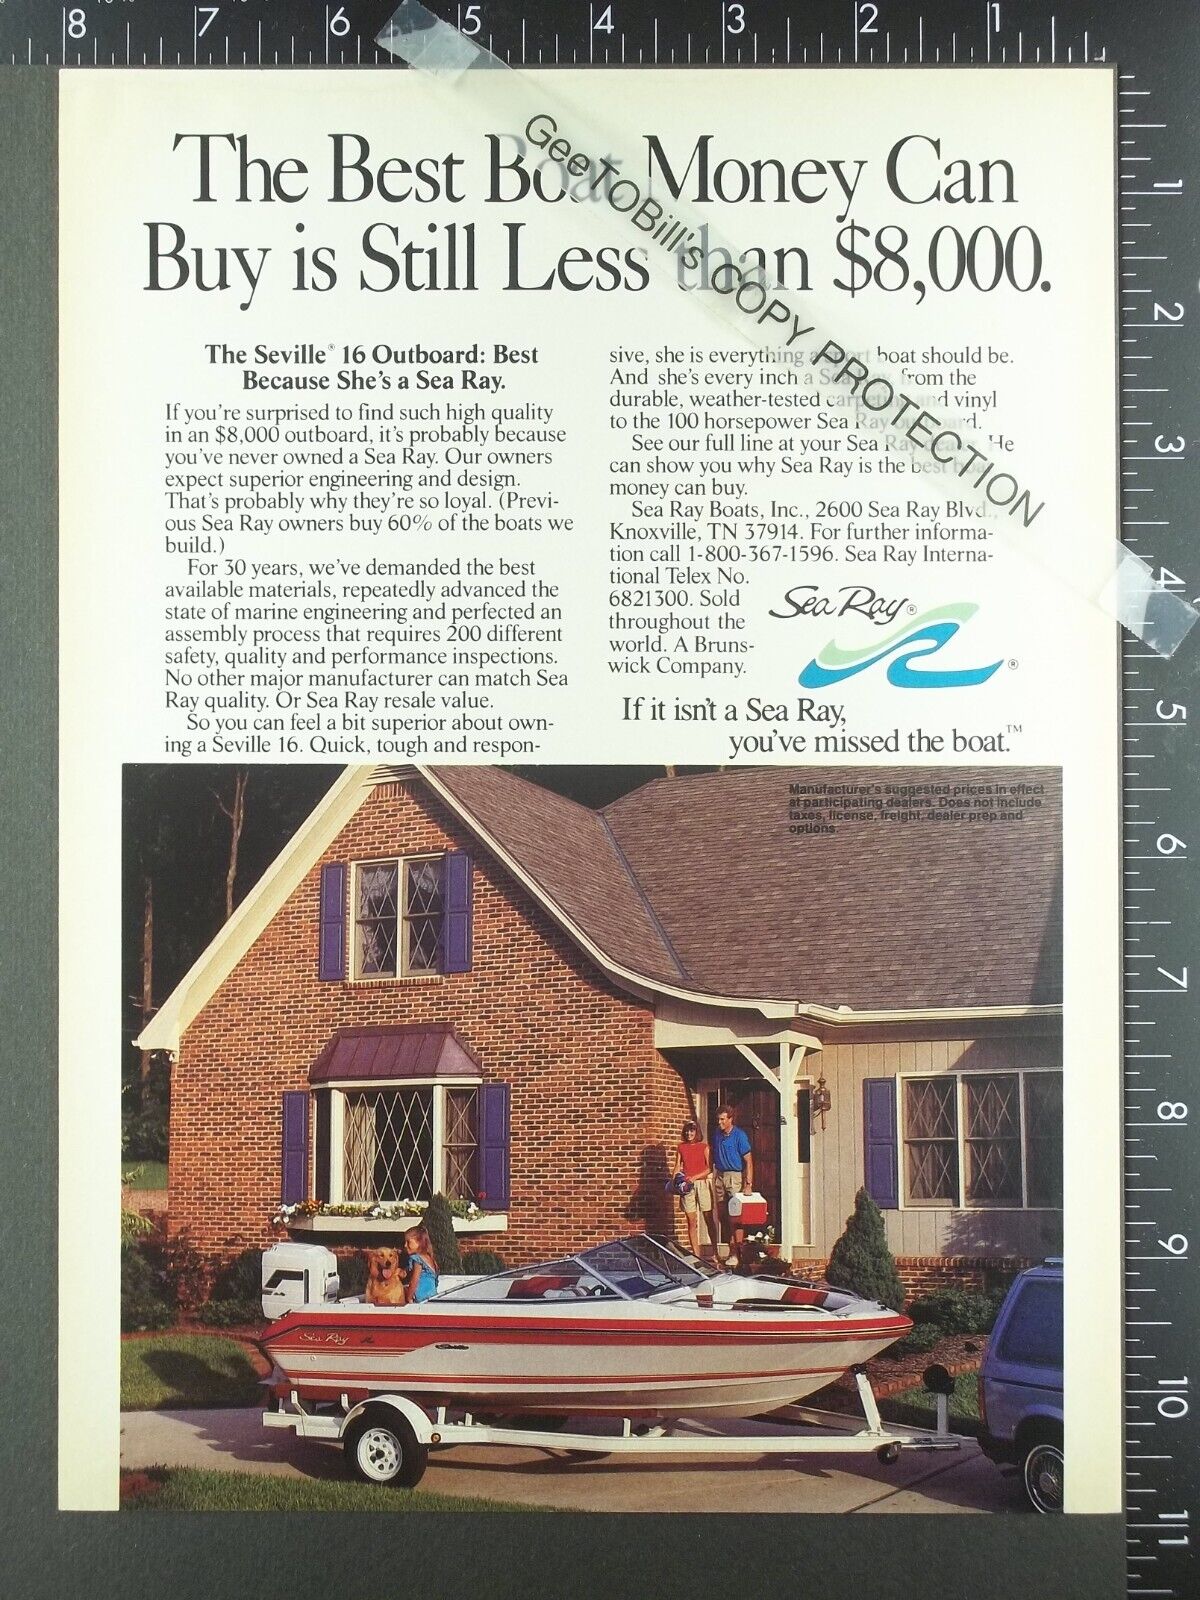 1987 ADVERTISING for Sea Ray Seville 16 motor yacht boat